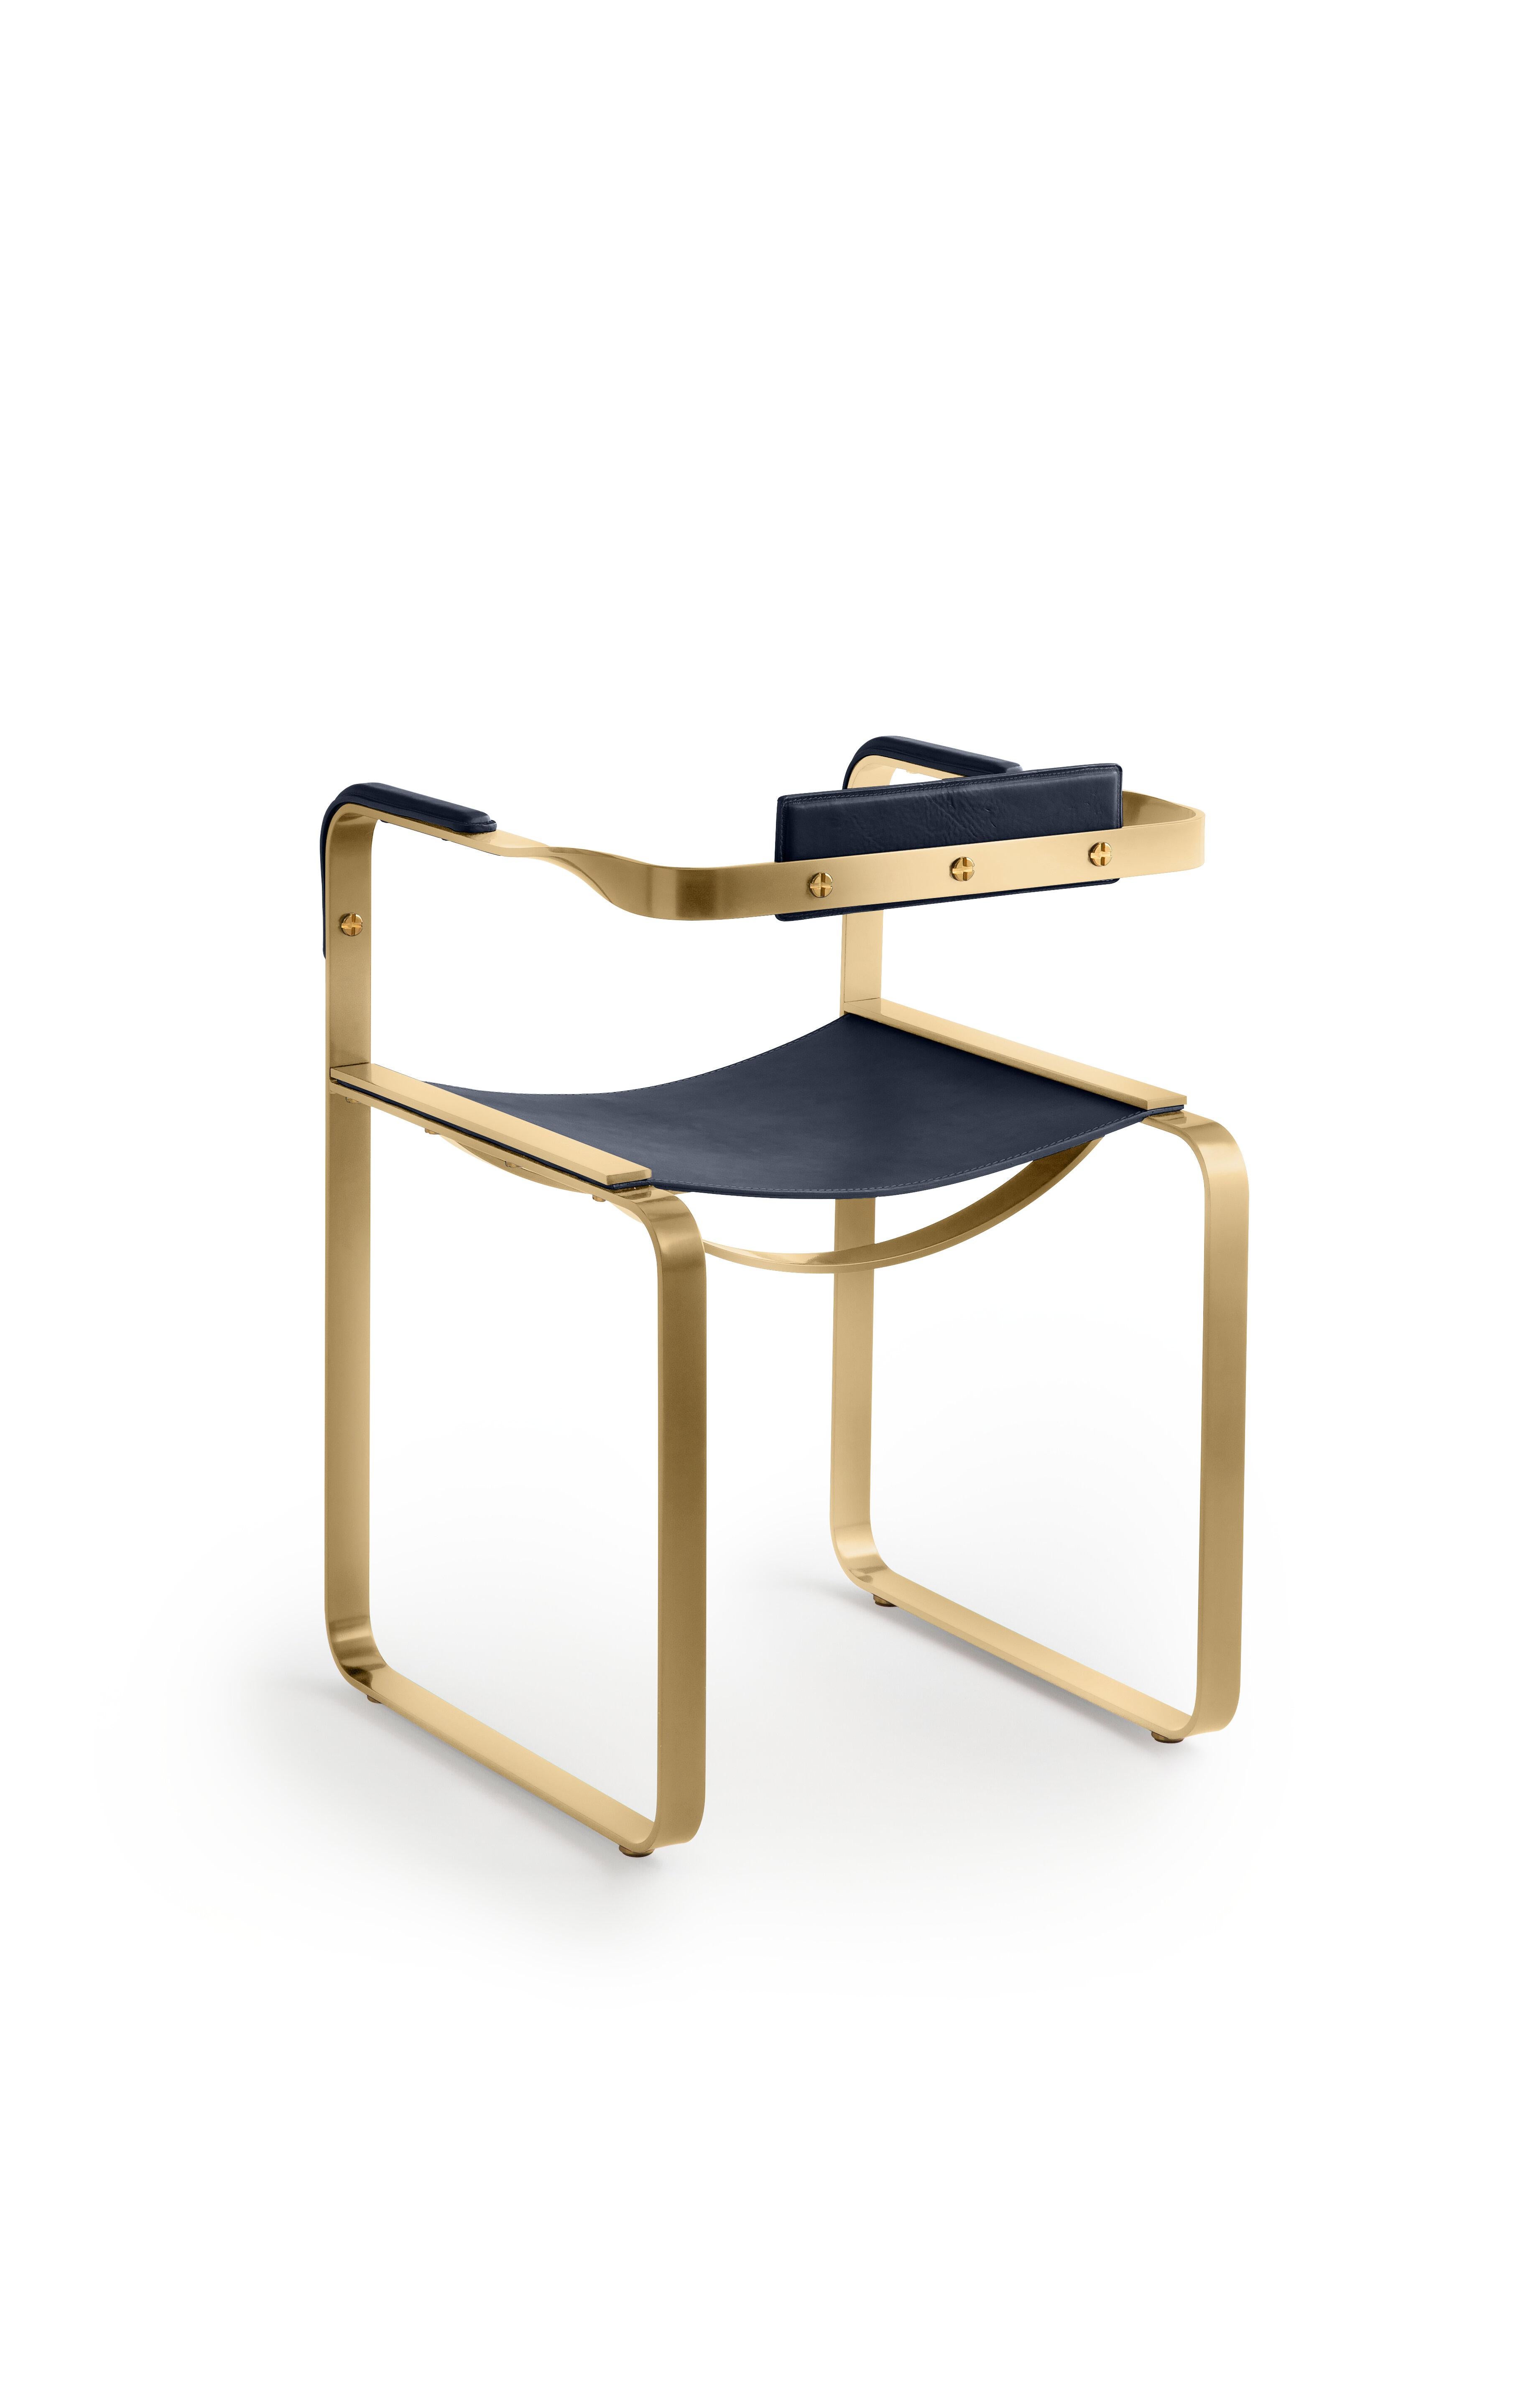 Minimalist Set of 2 Armchair, Aged Brass Steel & Blue Navy Saddle, Contemporary Style For Sale